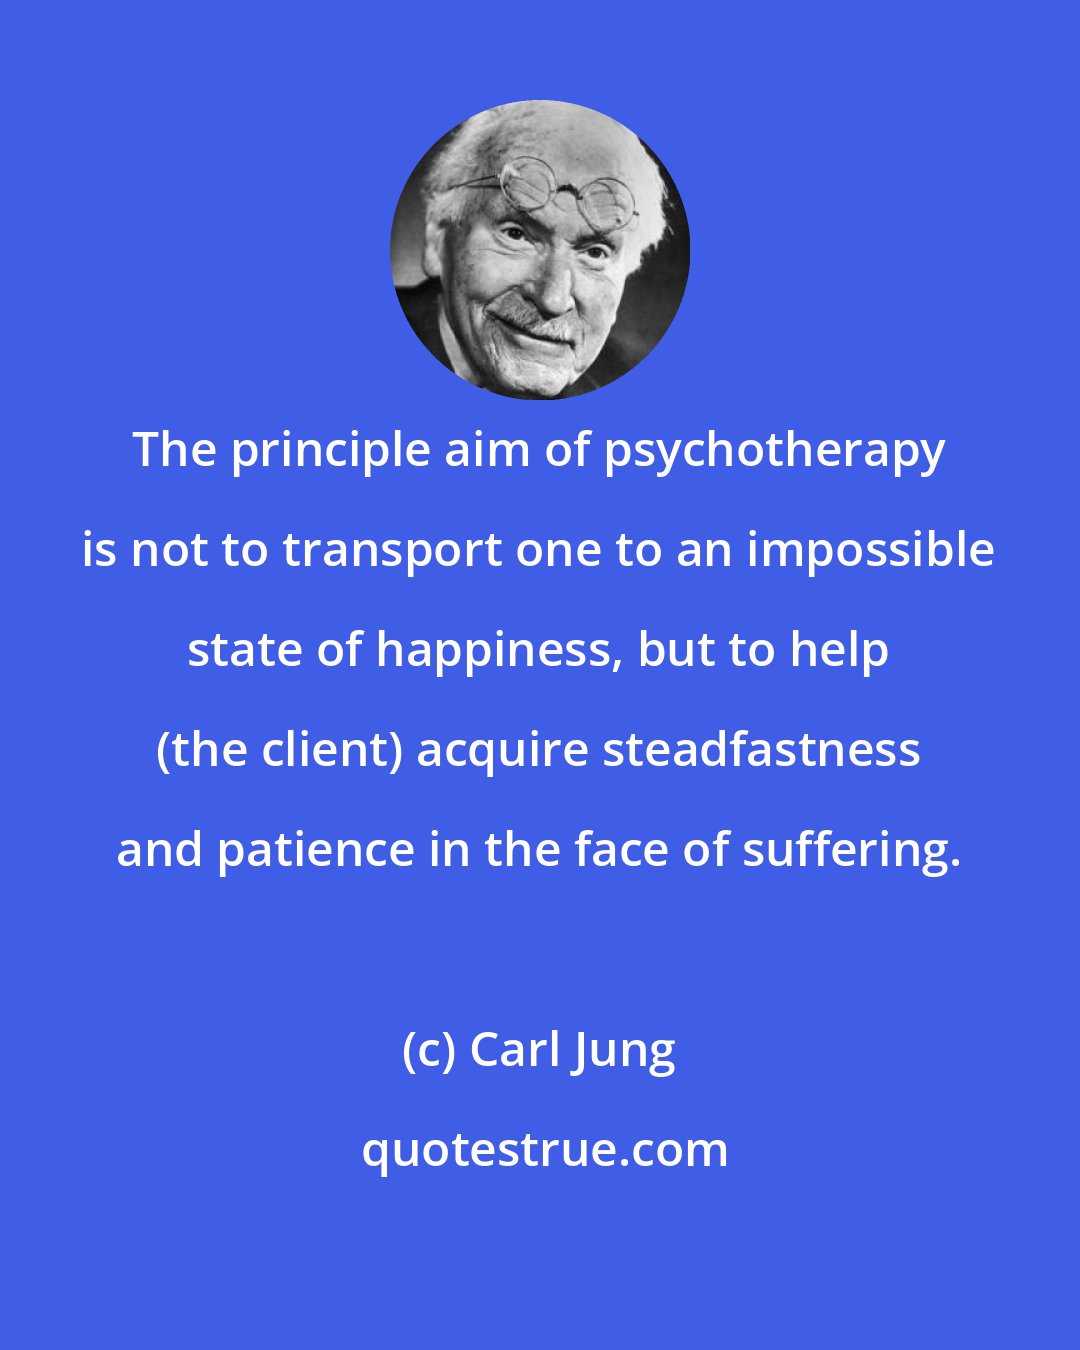 Carl Jung: The principle aim of psychotherapy is not to transport one to an impossible state of happiness, but to help (the client) acquire steadfastness and patience in the face of suffering.